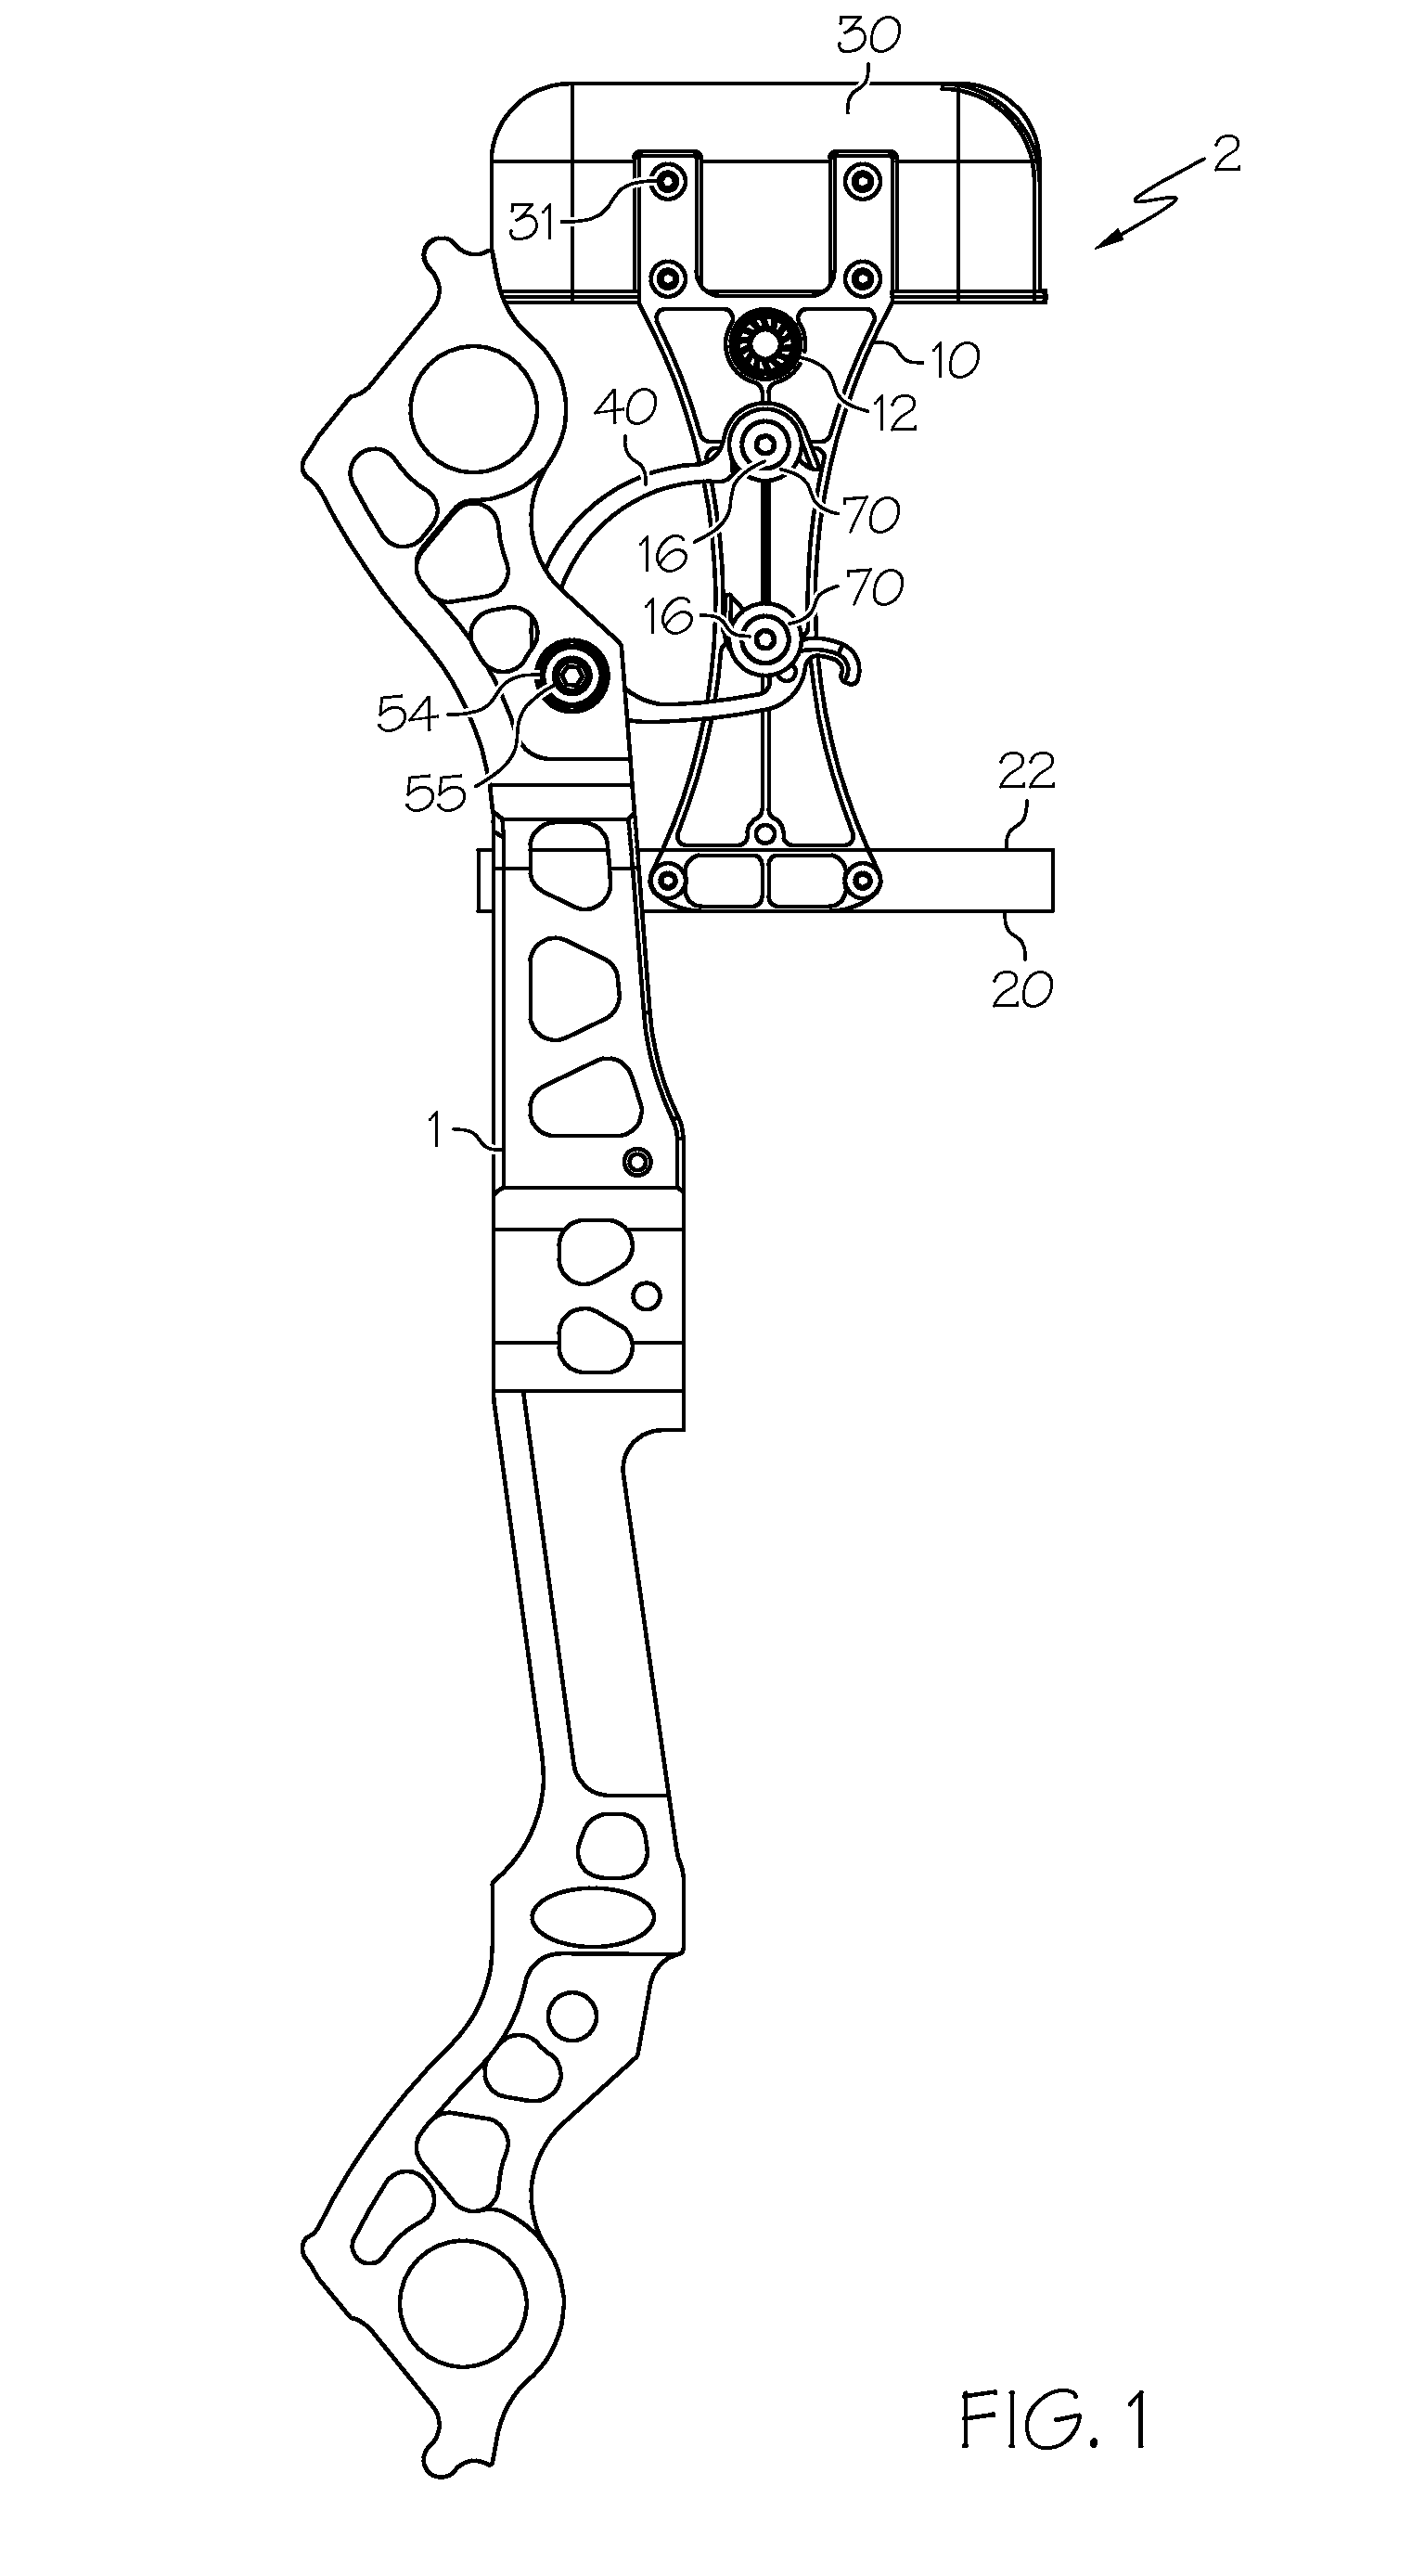 Apparatus and method for releasably mounting an accessory to an object such as for releasably mounting an arrow quiver to an archery bow